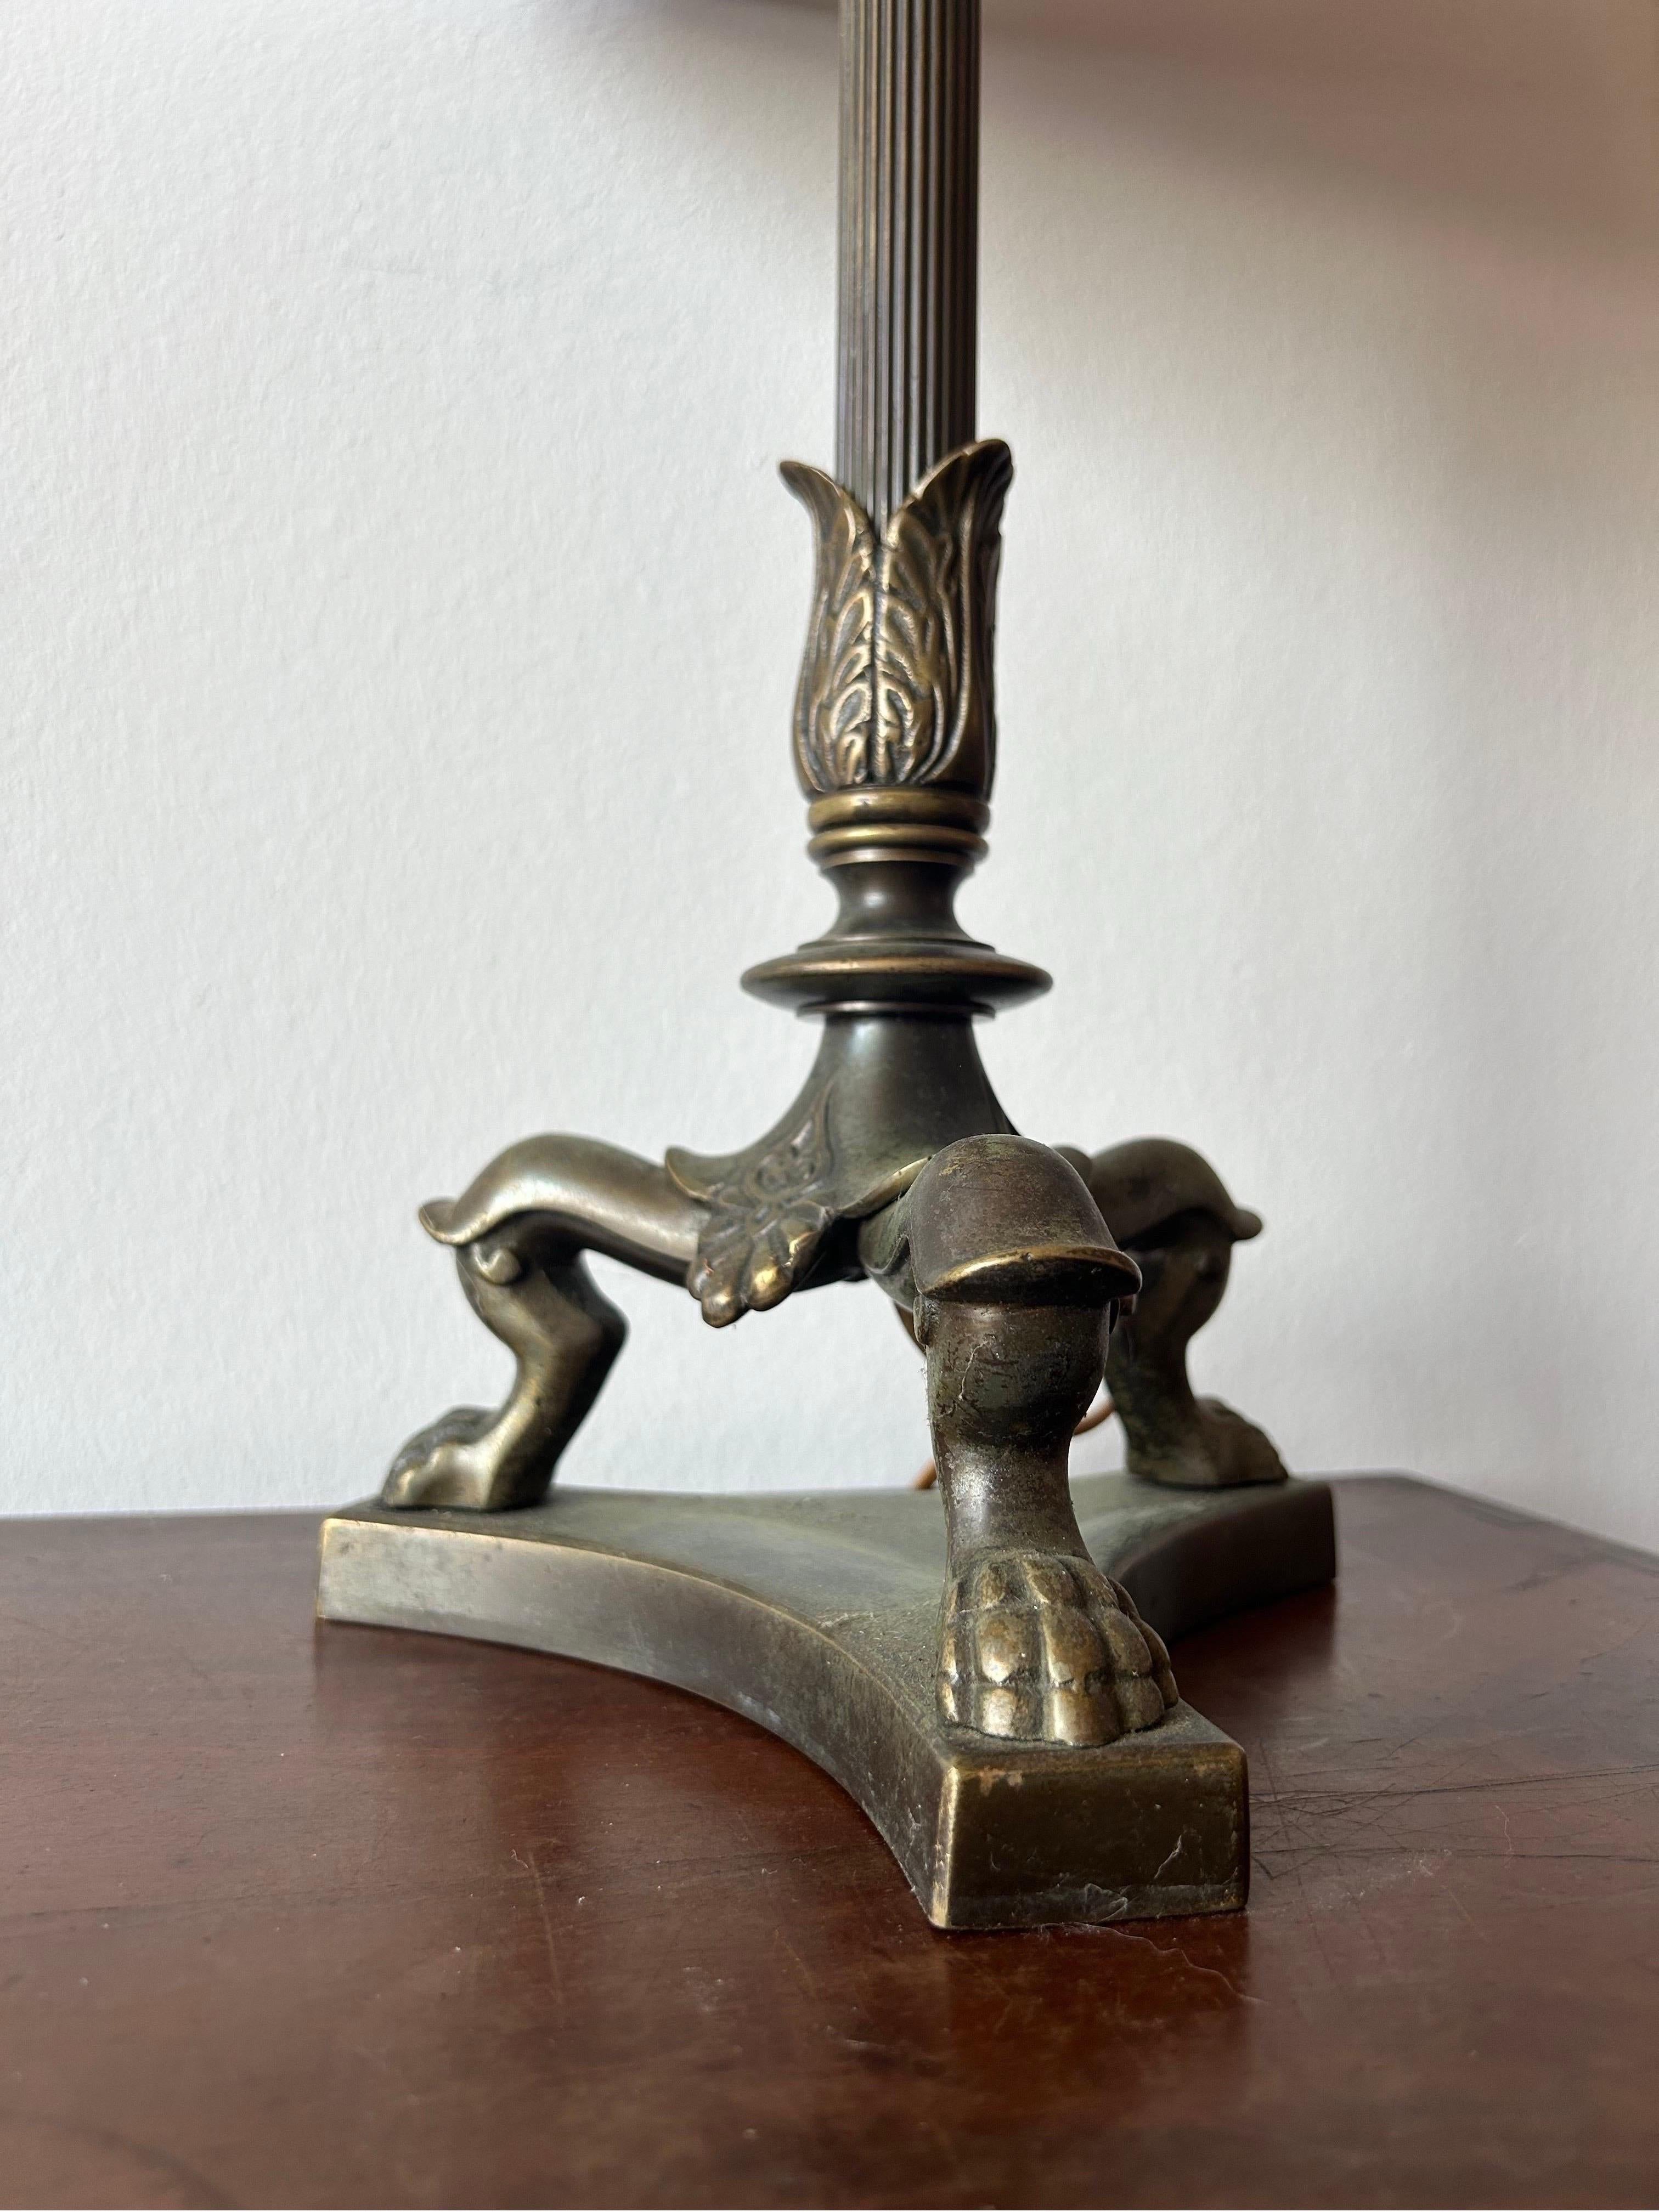 Artist made Bronze lamp attributed Danish Sculptor TH Stein and is made in the 1850’s.
The lamp has clear references to both Pompeii and Herculanum.
The lamp is made in solid bronze with a beautiful natural patina which the lamp has gotten after